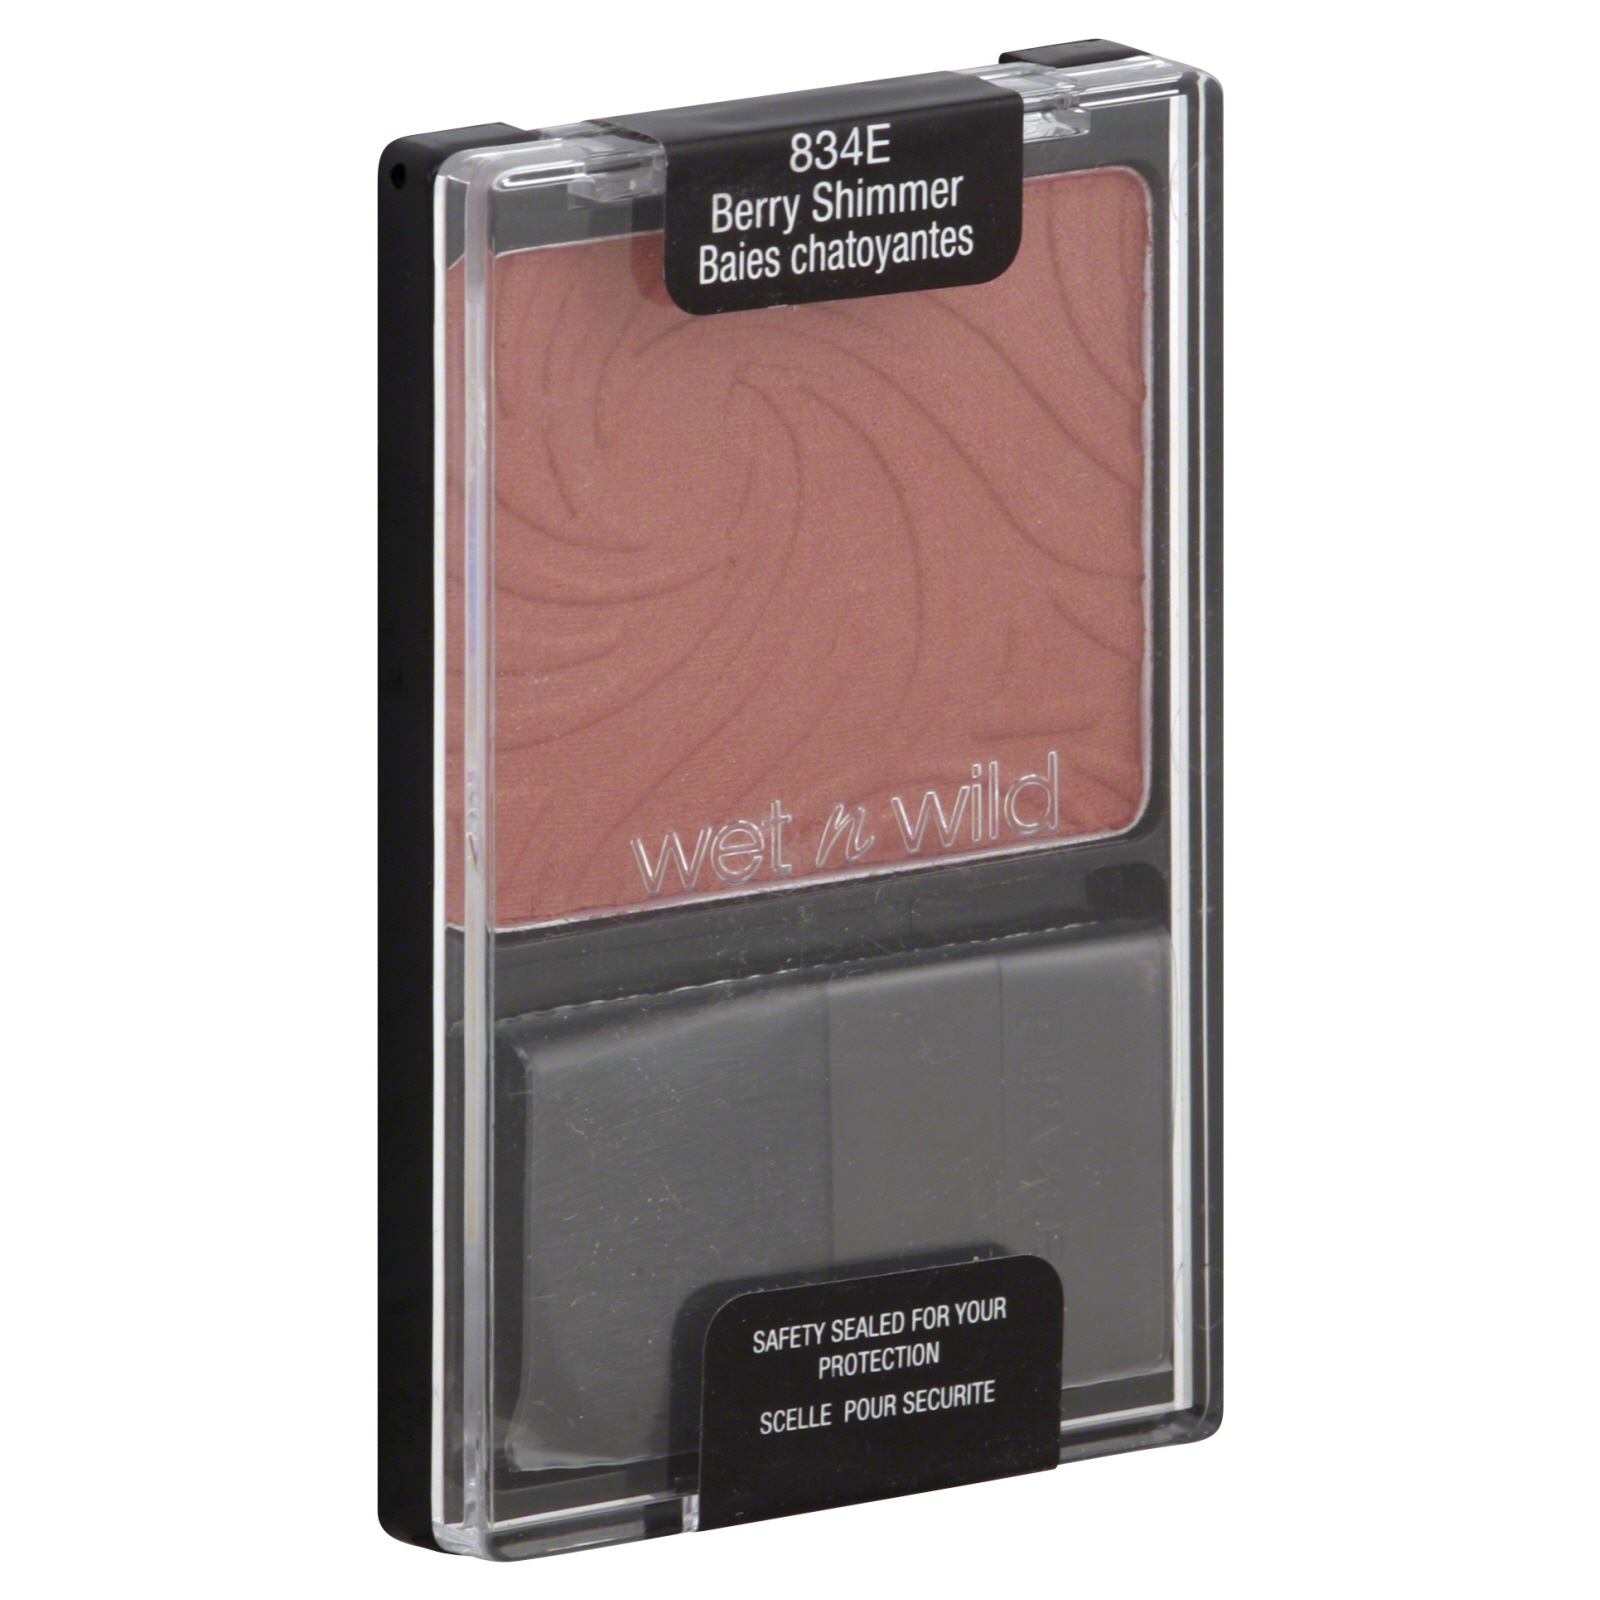 Wet n Wild Color Icon Blusher Pressed Powder, Berry Shimmer 834E, 0.14 oz